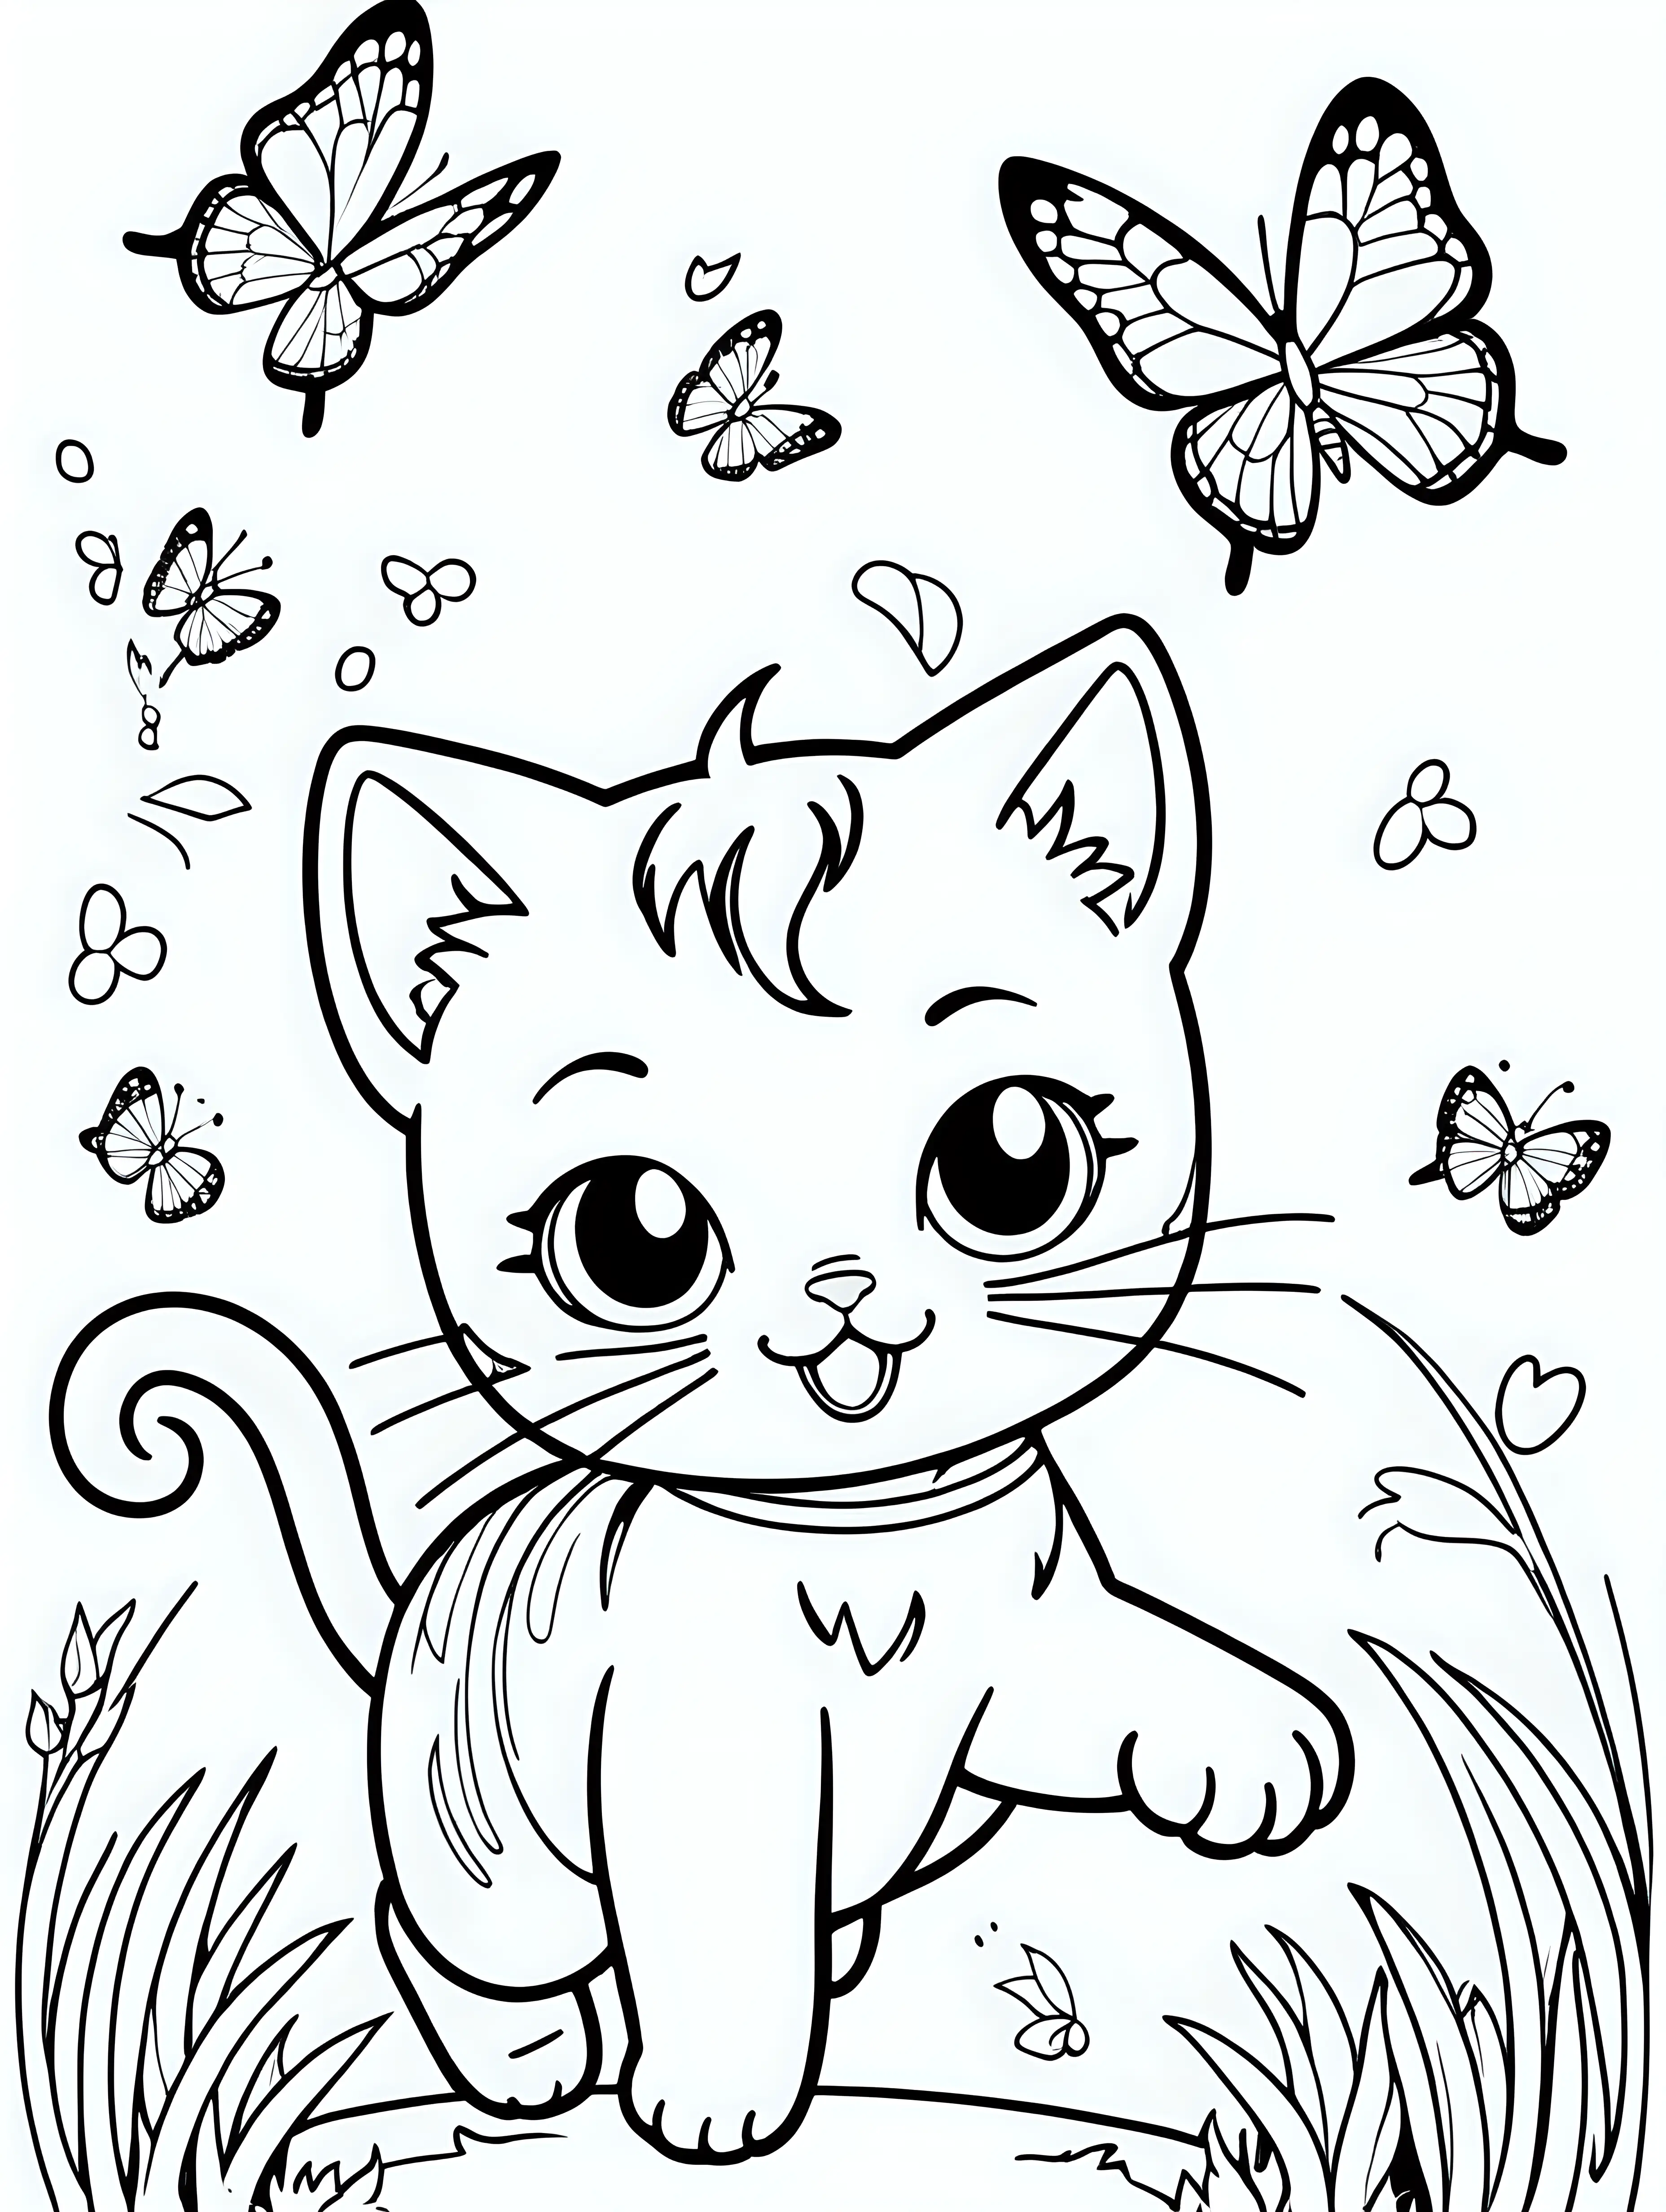 black and white coloring page for children with a kawaii happy cat with four legs chasing a butterfly flying over its head, black lines white background